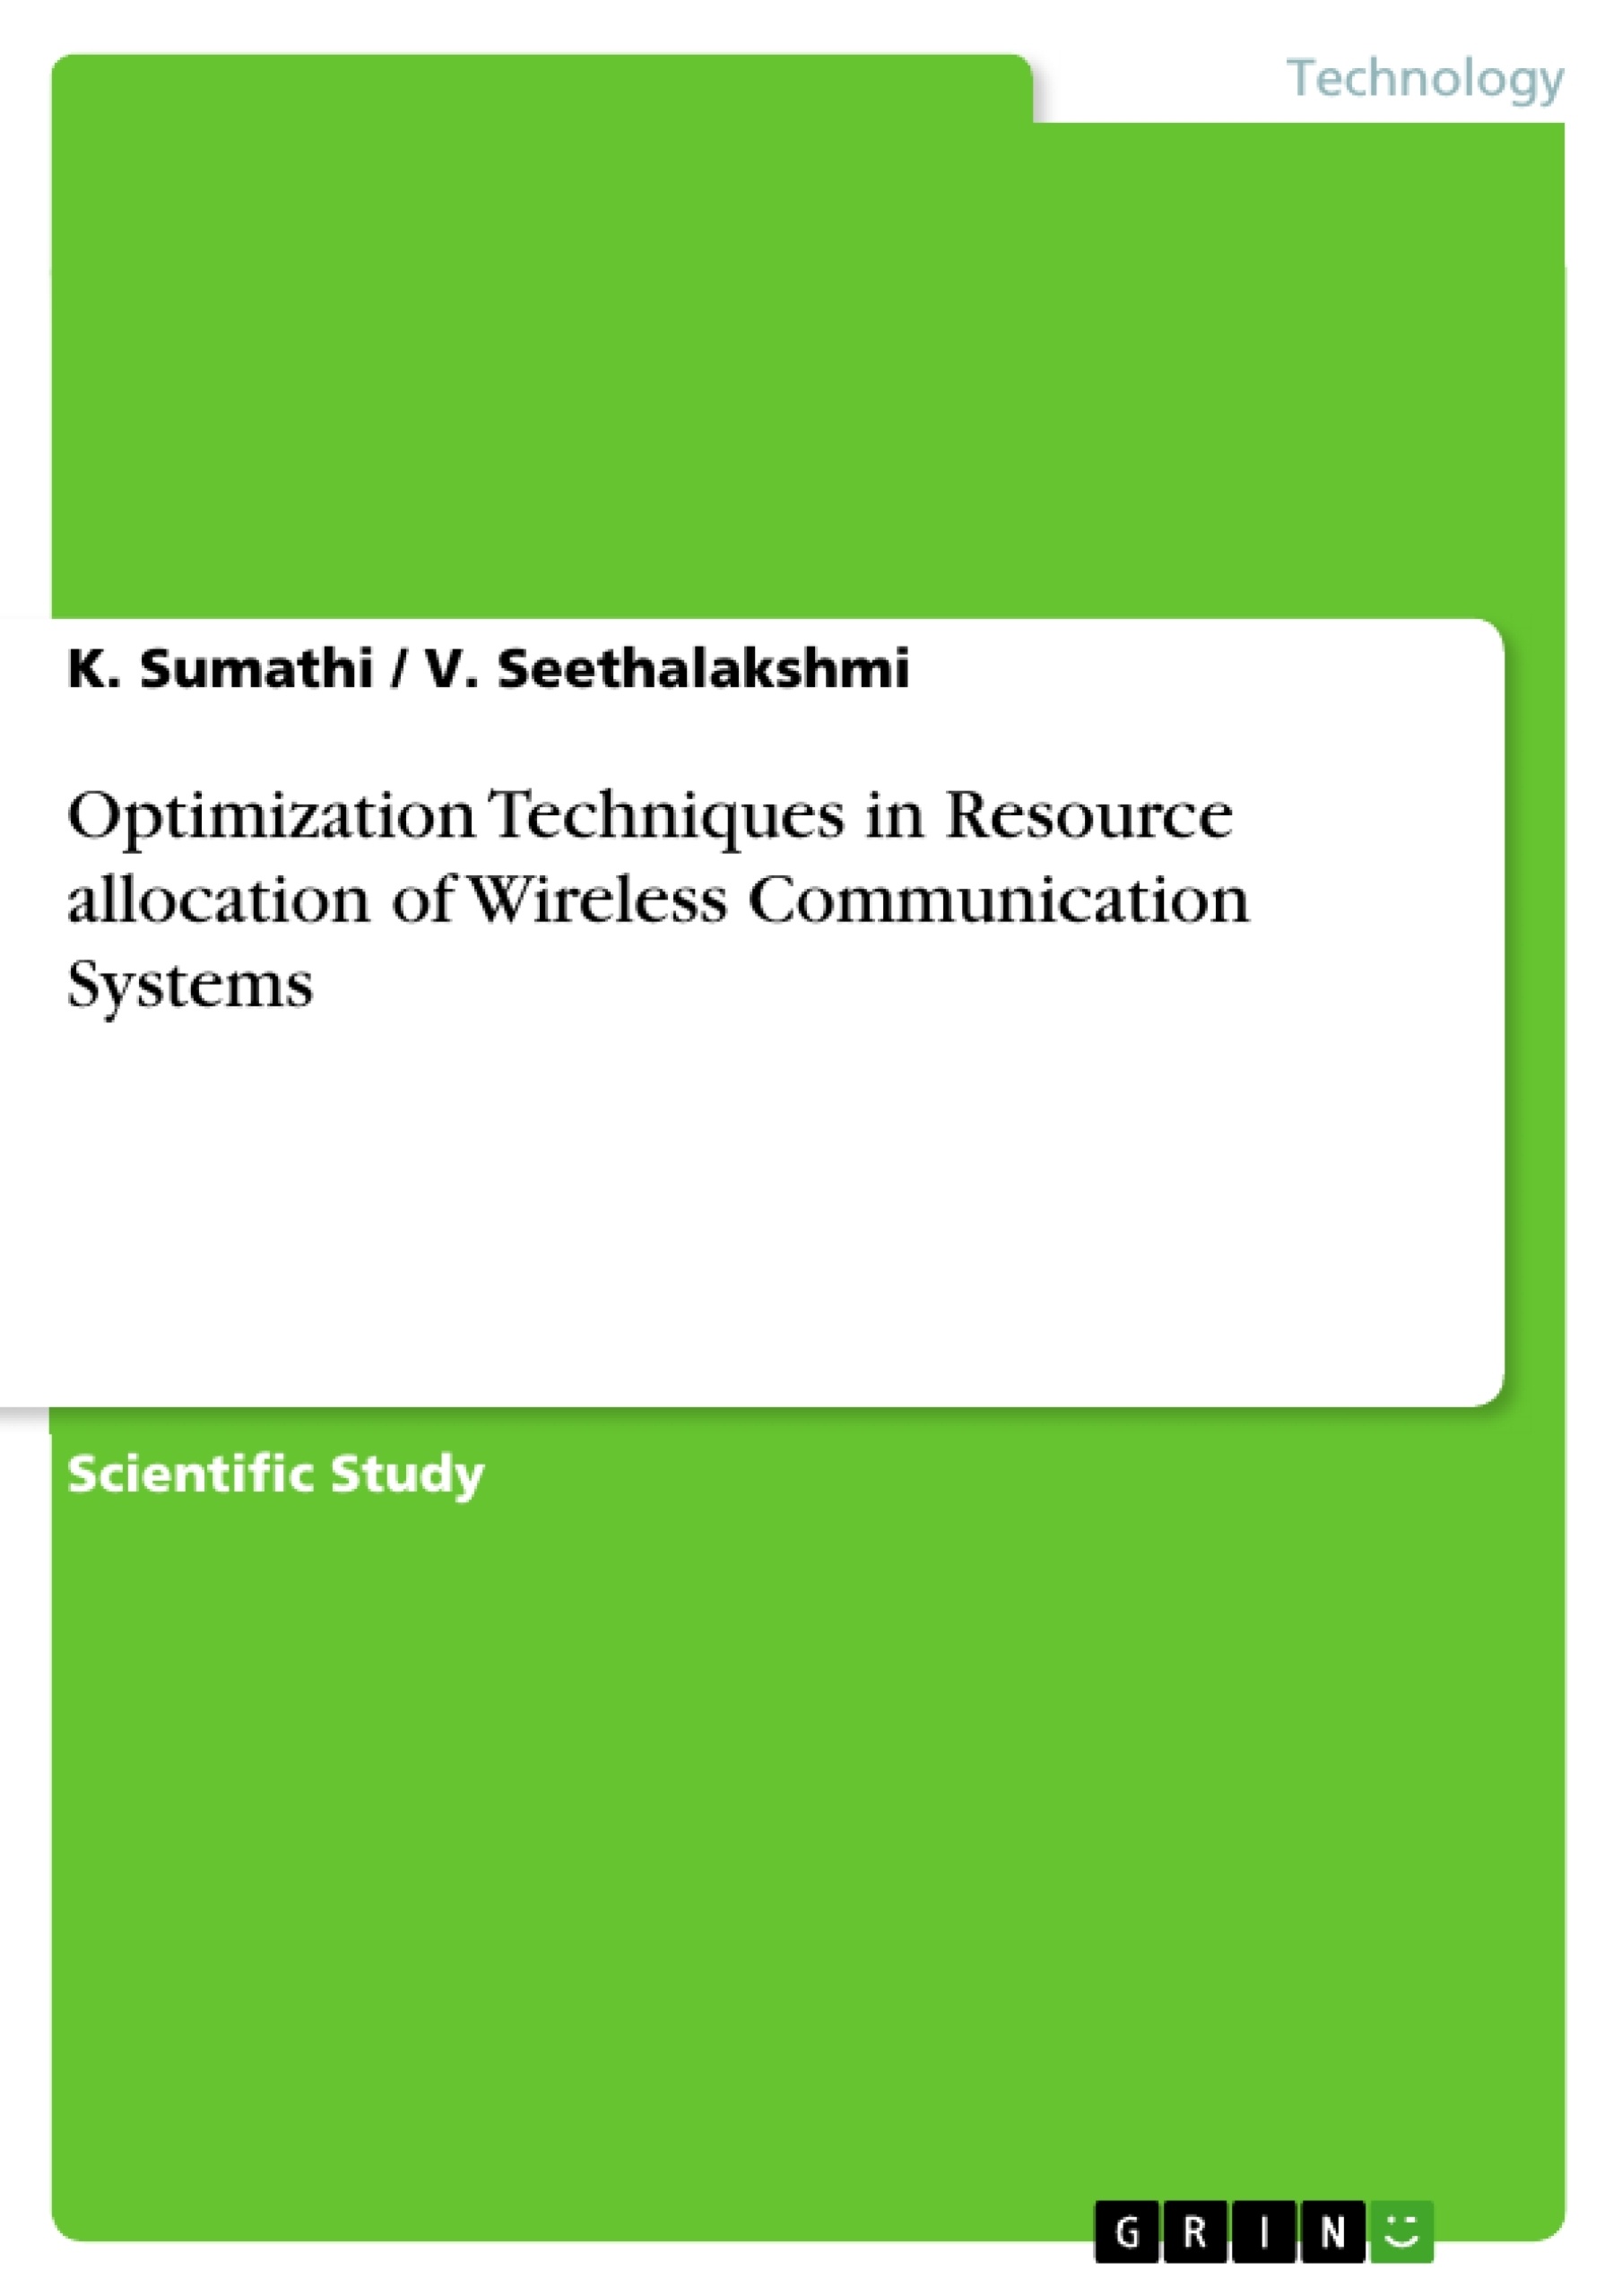 Title: Optimization Techniques in Resource allocation of Wireless Communication Systems